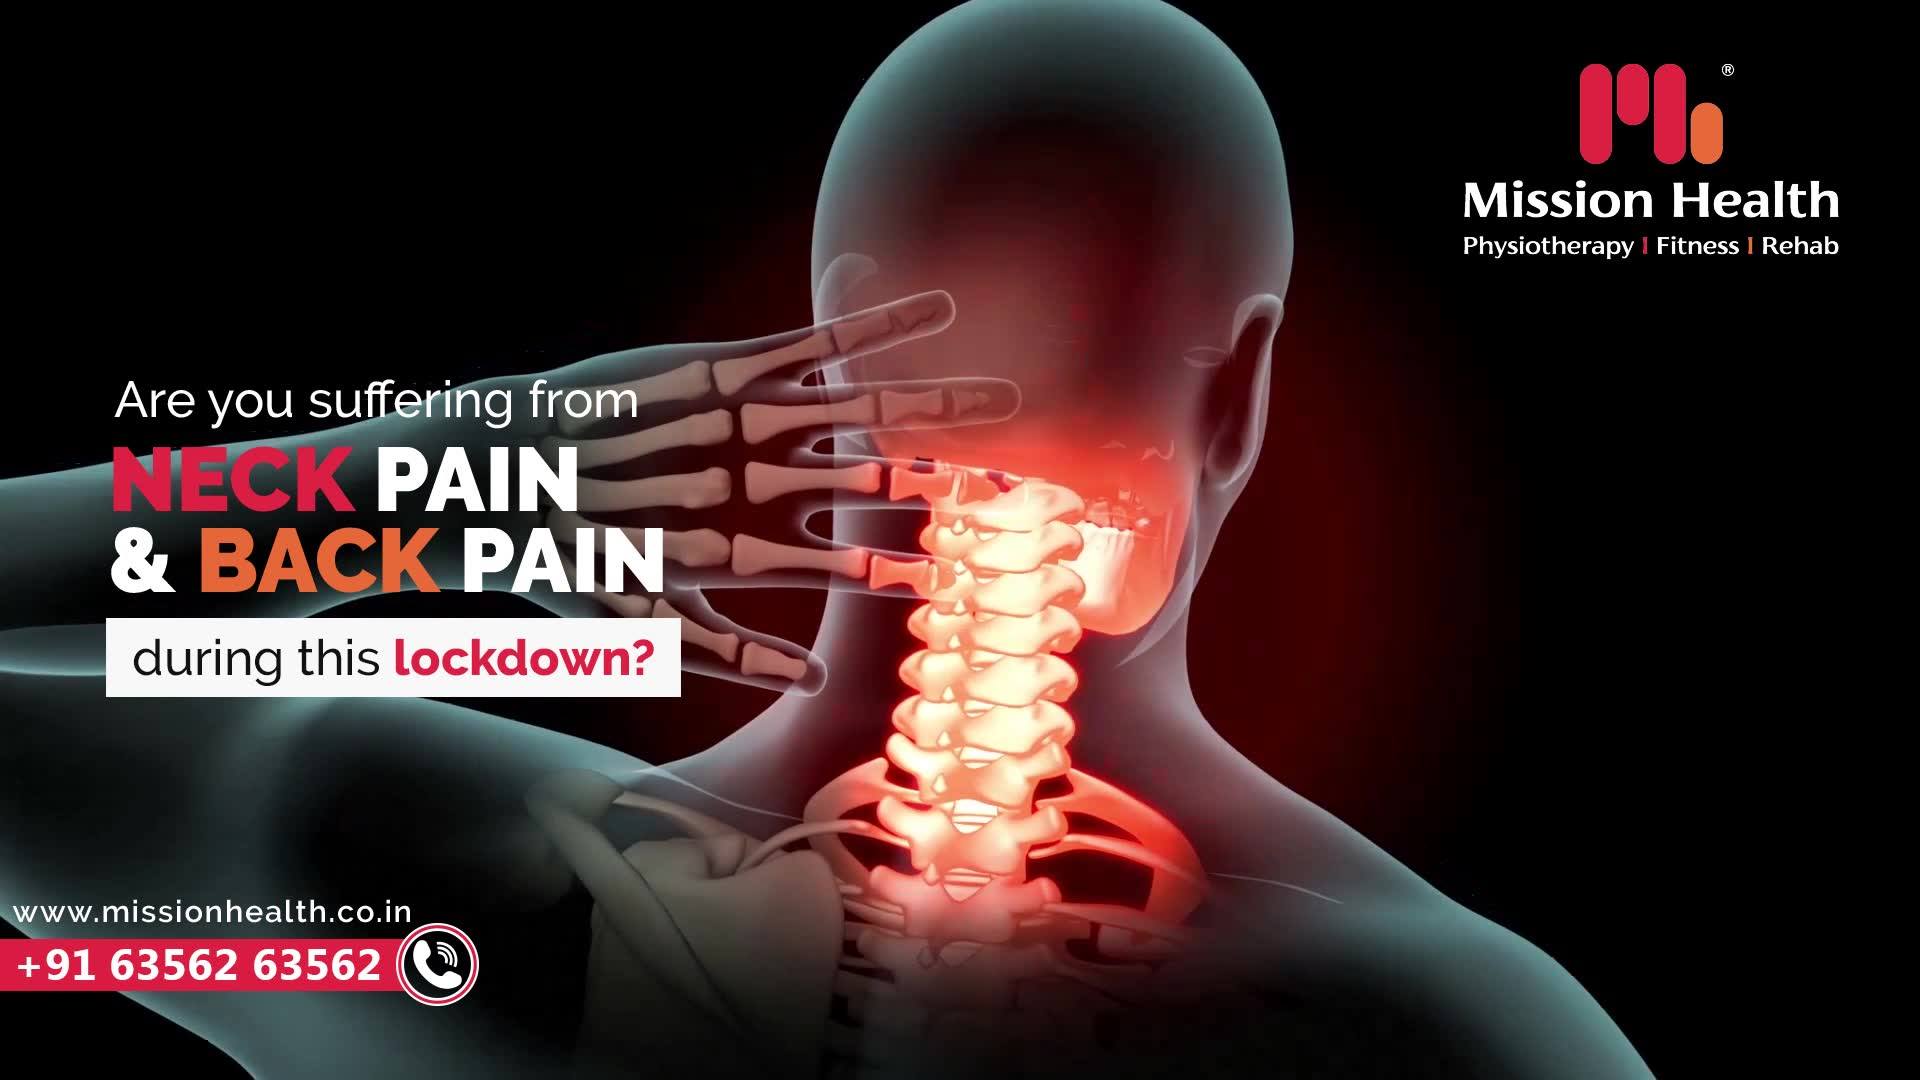 Are you suffering from Neck Pain & Back Pain during this lockdown? 

The most possible reasons could be over usage of gadgets and incorrect postures while working from home.
 
Share your problem & symptoms with us and schedule your appointment. Ignoring a Minor pain today can result in a Major Spine Problems tomorrow.     

Call +916356263562
www.missionhealth.co.in

#IndiaFightsCorona #Coronavirus #stayathome #lockdownopd #neurorehab #strokerehab #stroke #strokesurvior #openingsoon #physiotherapy #physiotherapist #neckpain #jointpain #backpain #spineproblems #slippeddisc #stiffness #stress #panic #workfromhome #MissionHealth #MissionHealthIndia #MovementIsLife